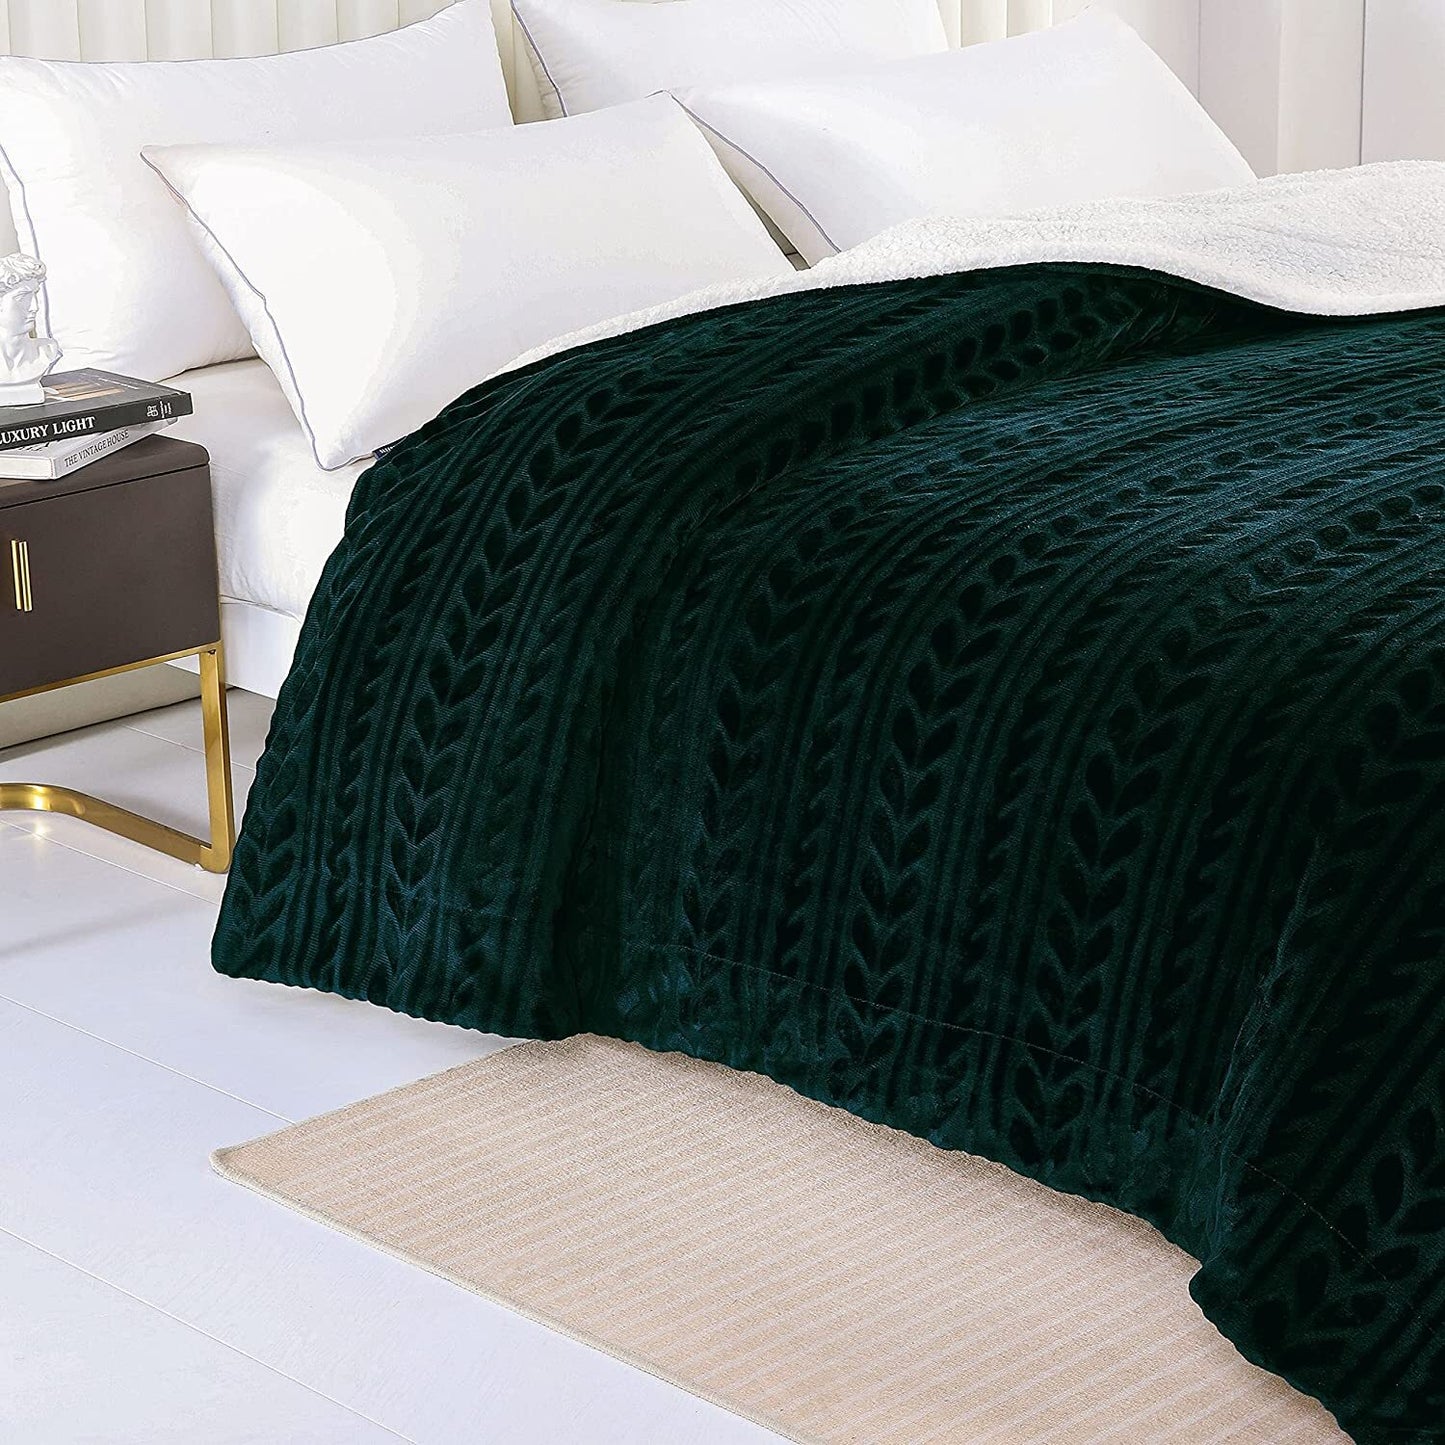 Exclusivo Mezcla Twin Size Sherpa Fleece Bed Blanket, Ultra Soft and Warm Reversible Velvet Blankets for Bed Couch Sofa 90x66 inches, Forest Green